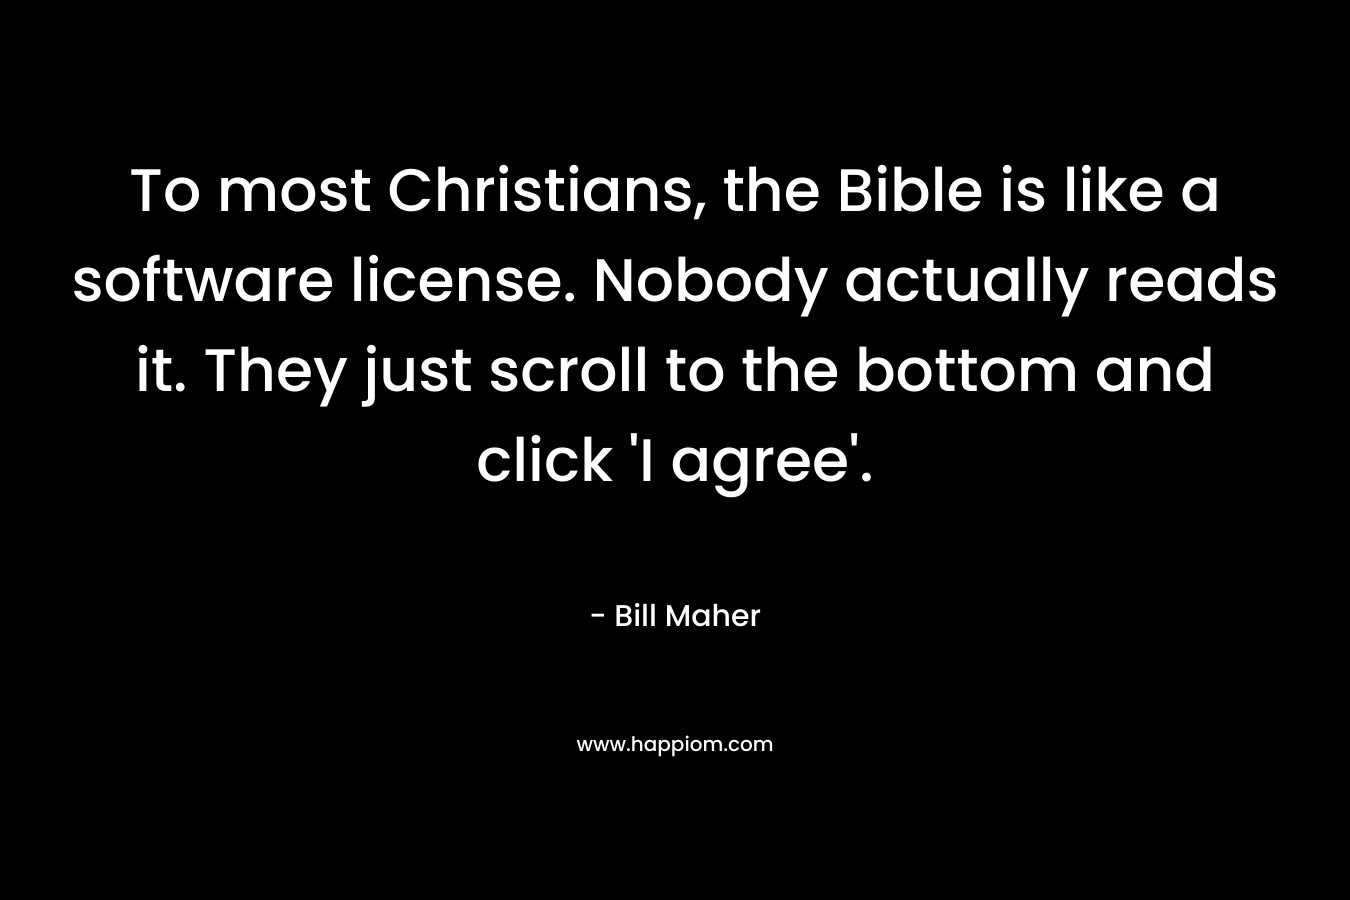 To most Christians, the Bible is like a software license. Nobody actually reads it. They just scroll to the bottom and click 'I agree'.